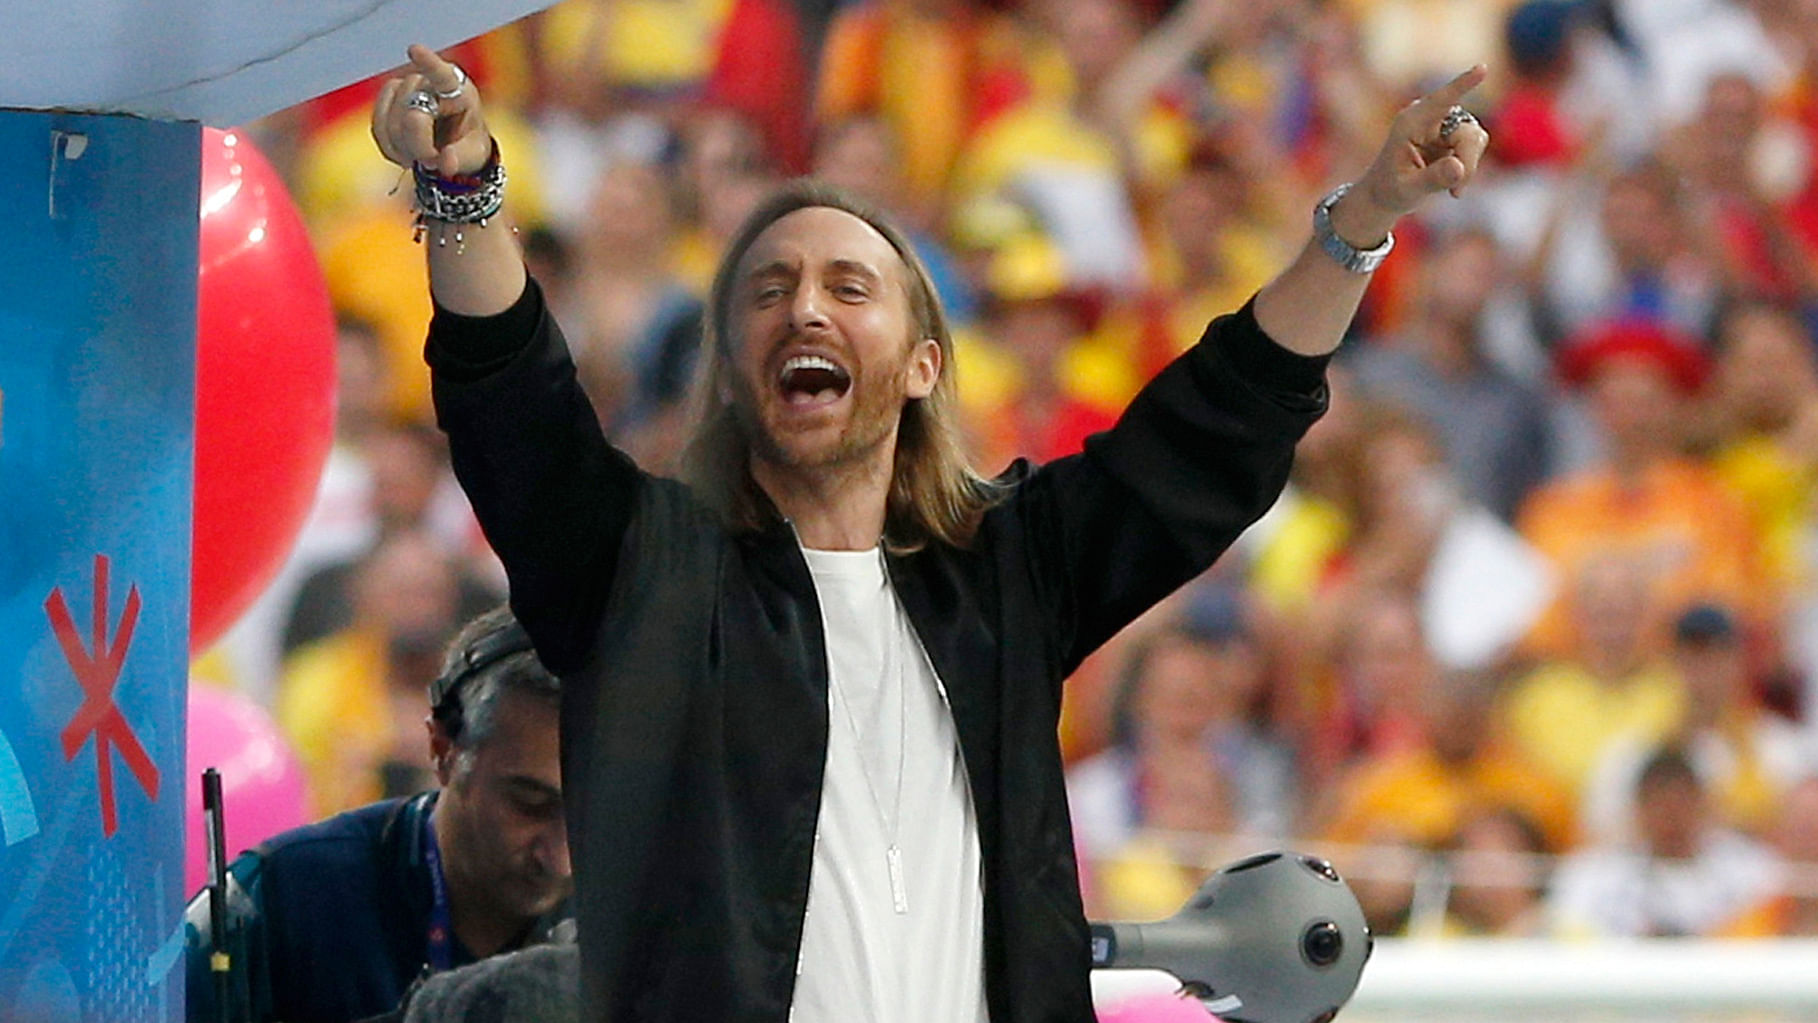 David Guetta performs at the Euro 2016 opening ceremony. (Photo: AP)